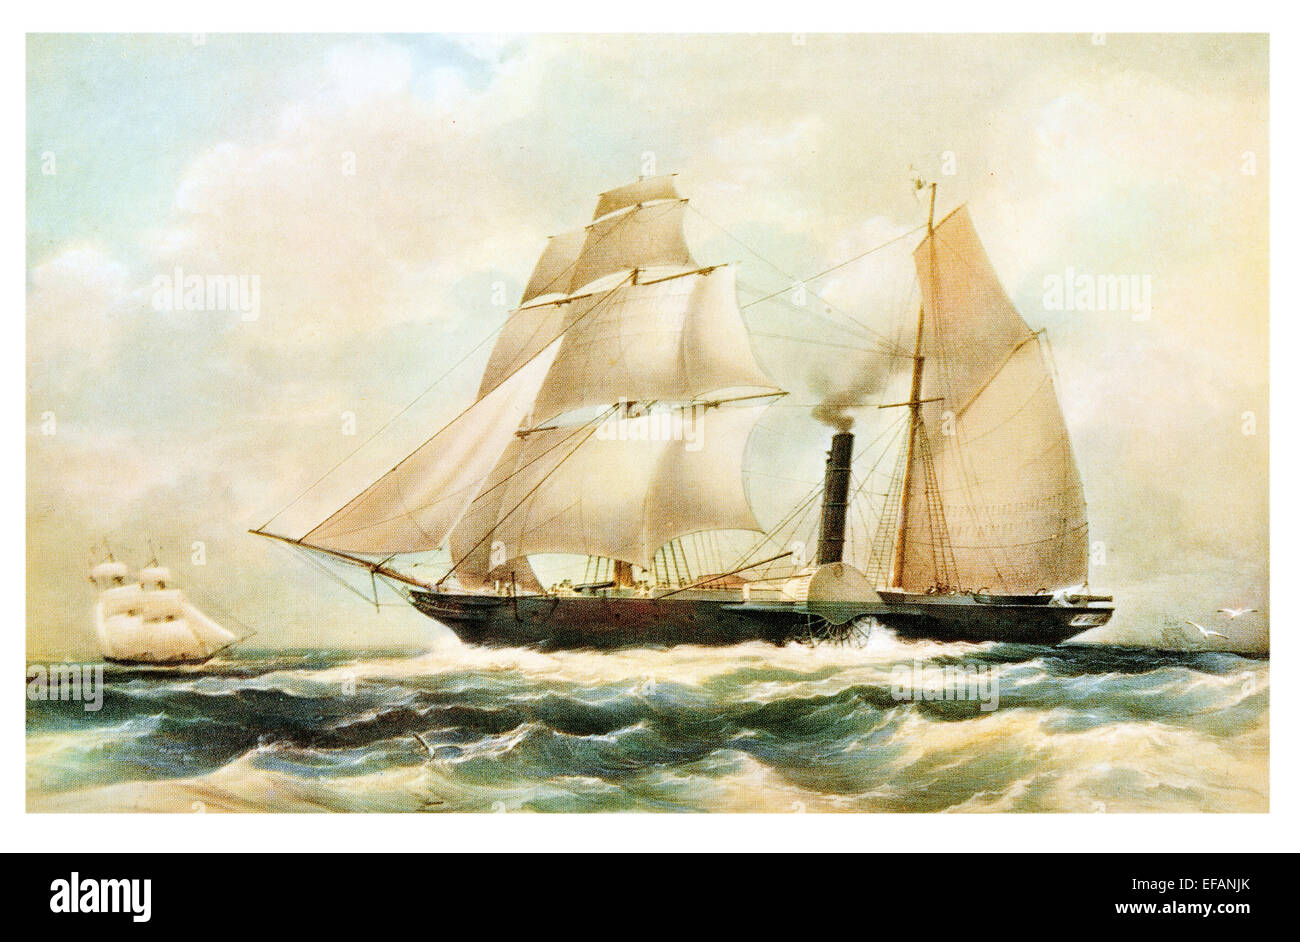 Paddle Steam Frigate Guadalupe first 1st iron man of war 1842 Launched Birkenhead Laird as a private speculation sold to Mexico Stock Photo